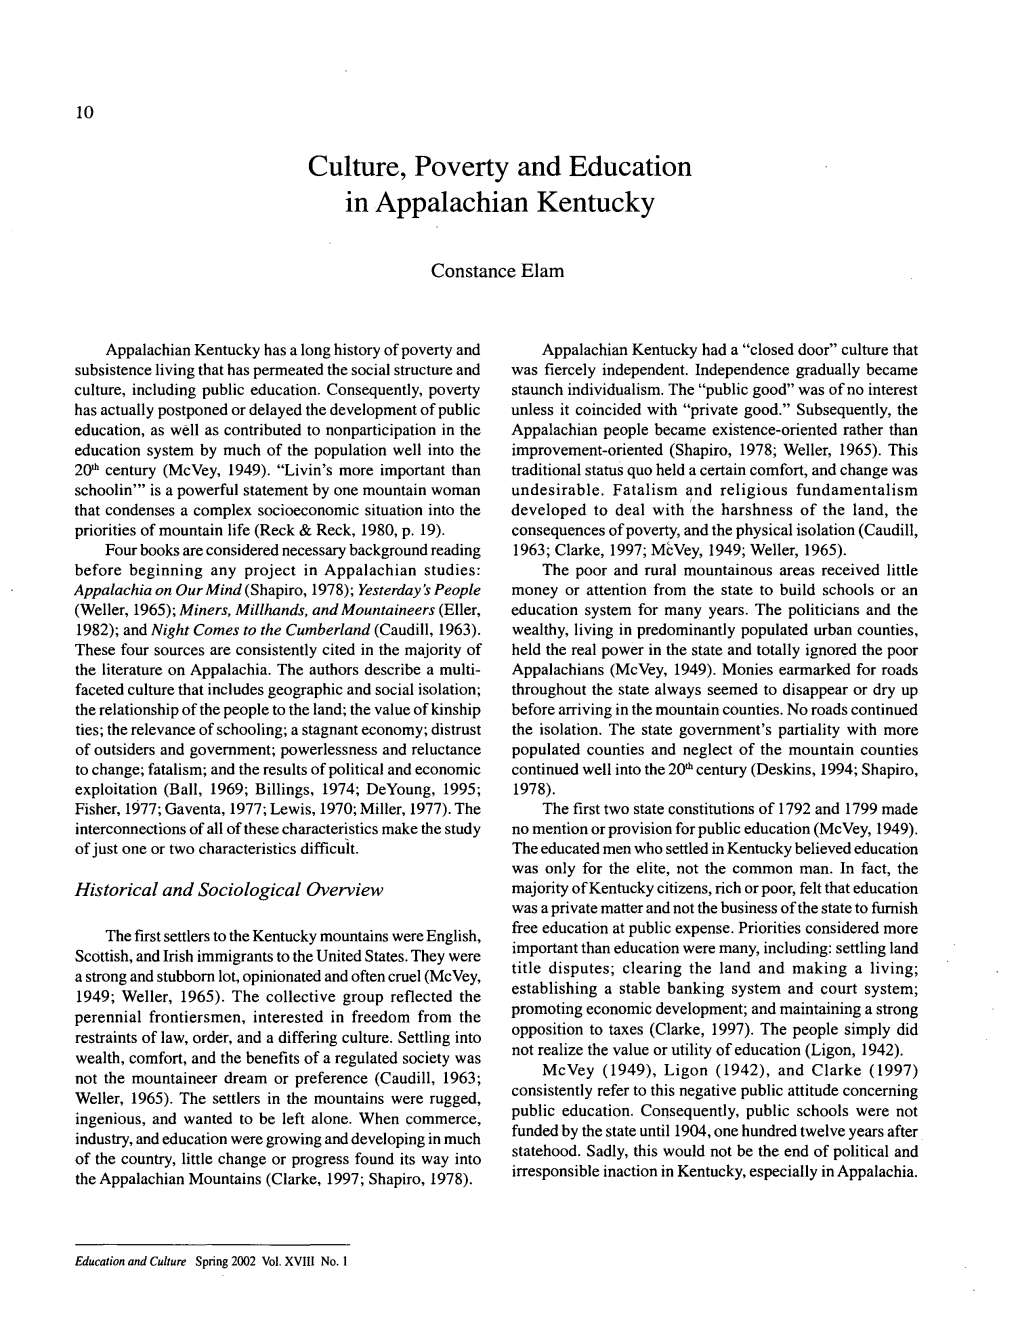 Culture, Poverty and Education in Appalachian Kentucky